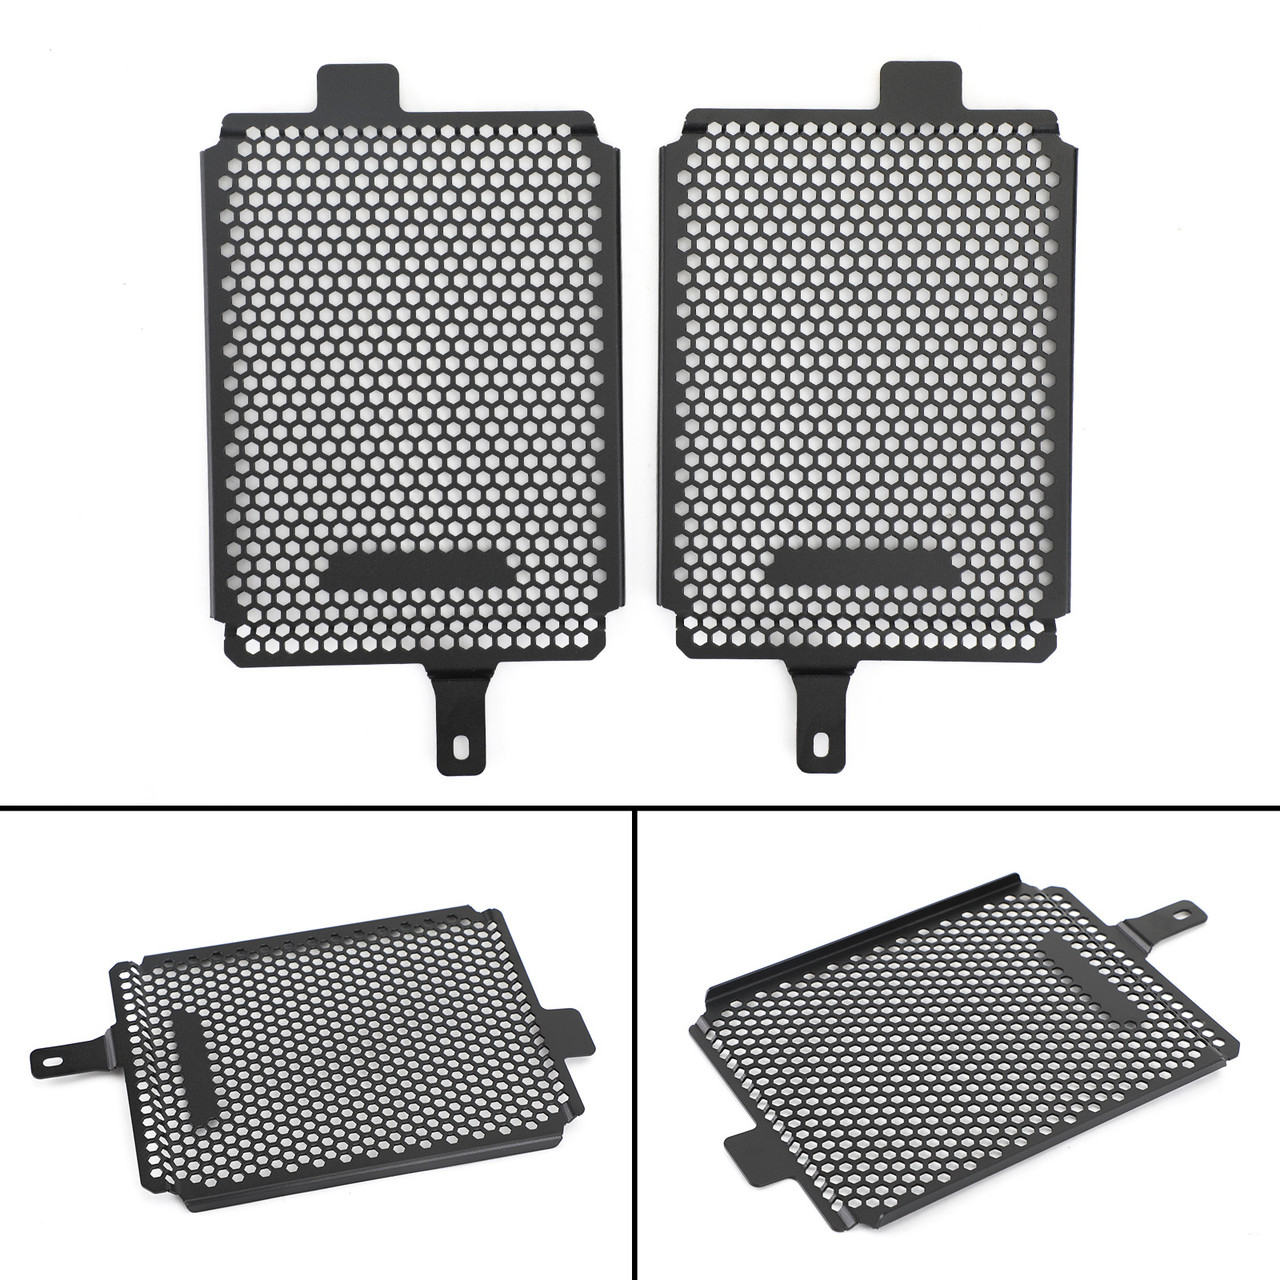 Radiator Guard Cover Protector Fit for BMW R1250GS Adventure Rallye TE 2019-2021